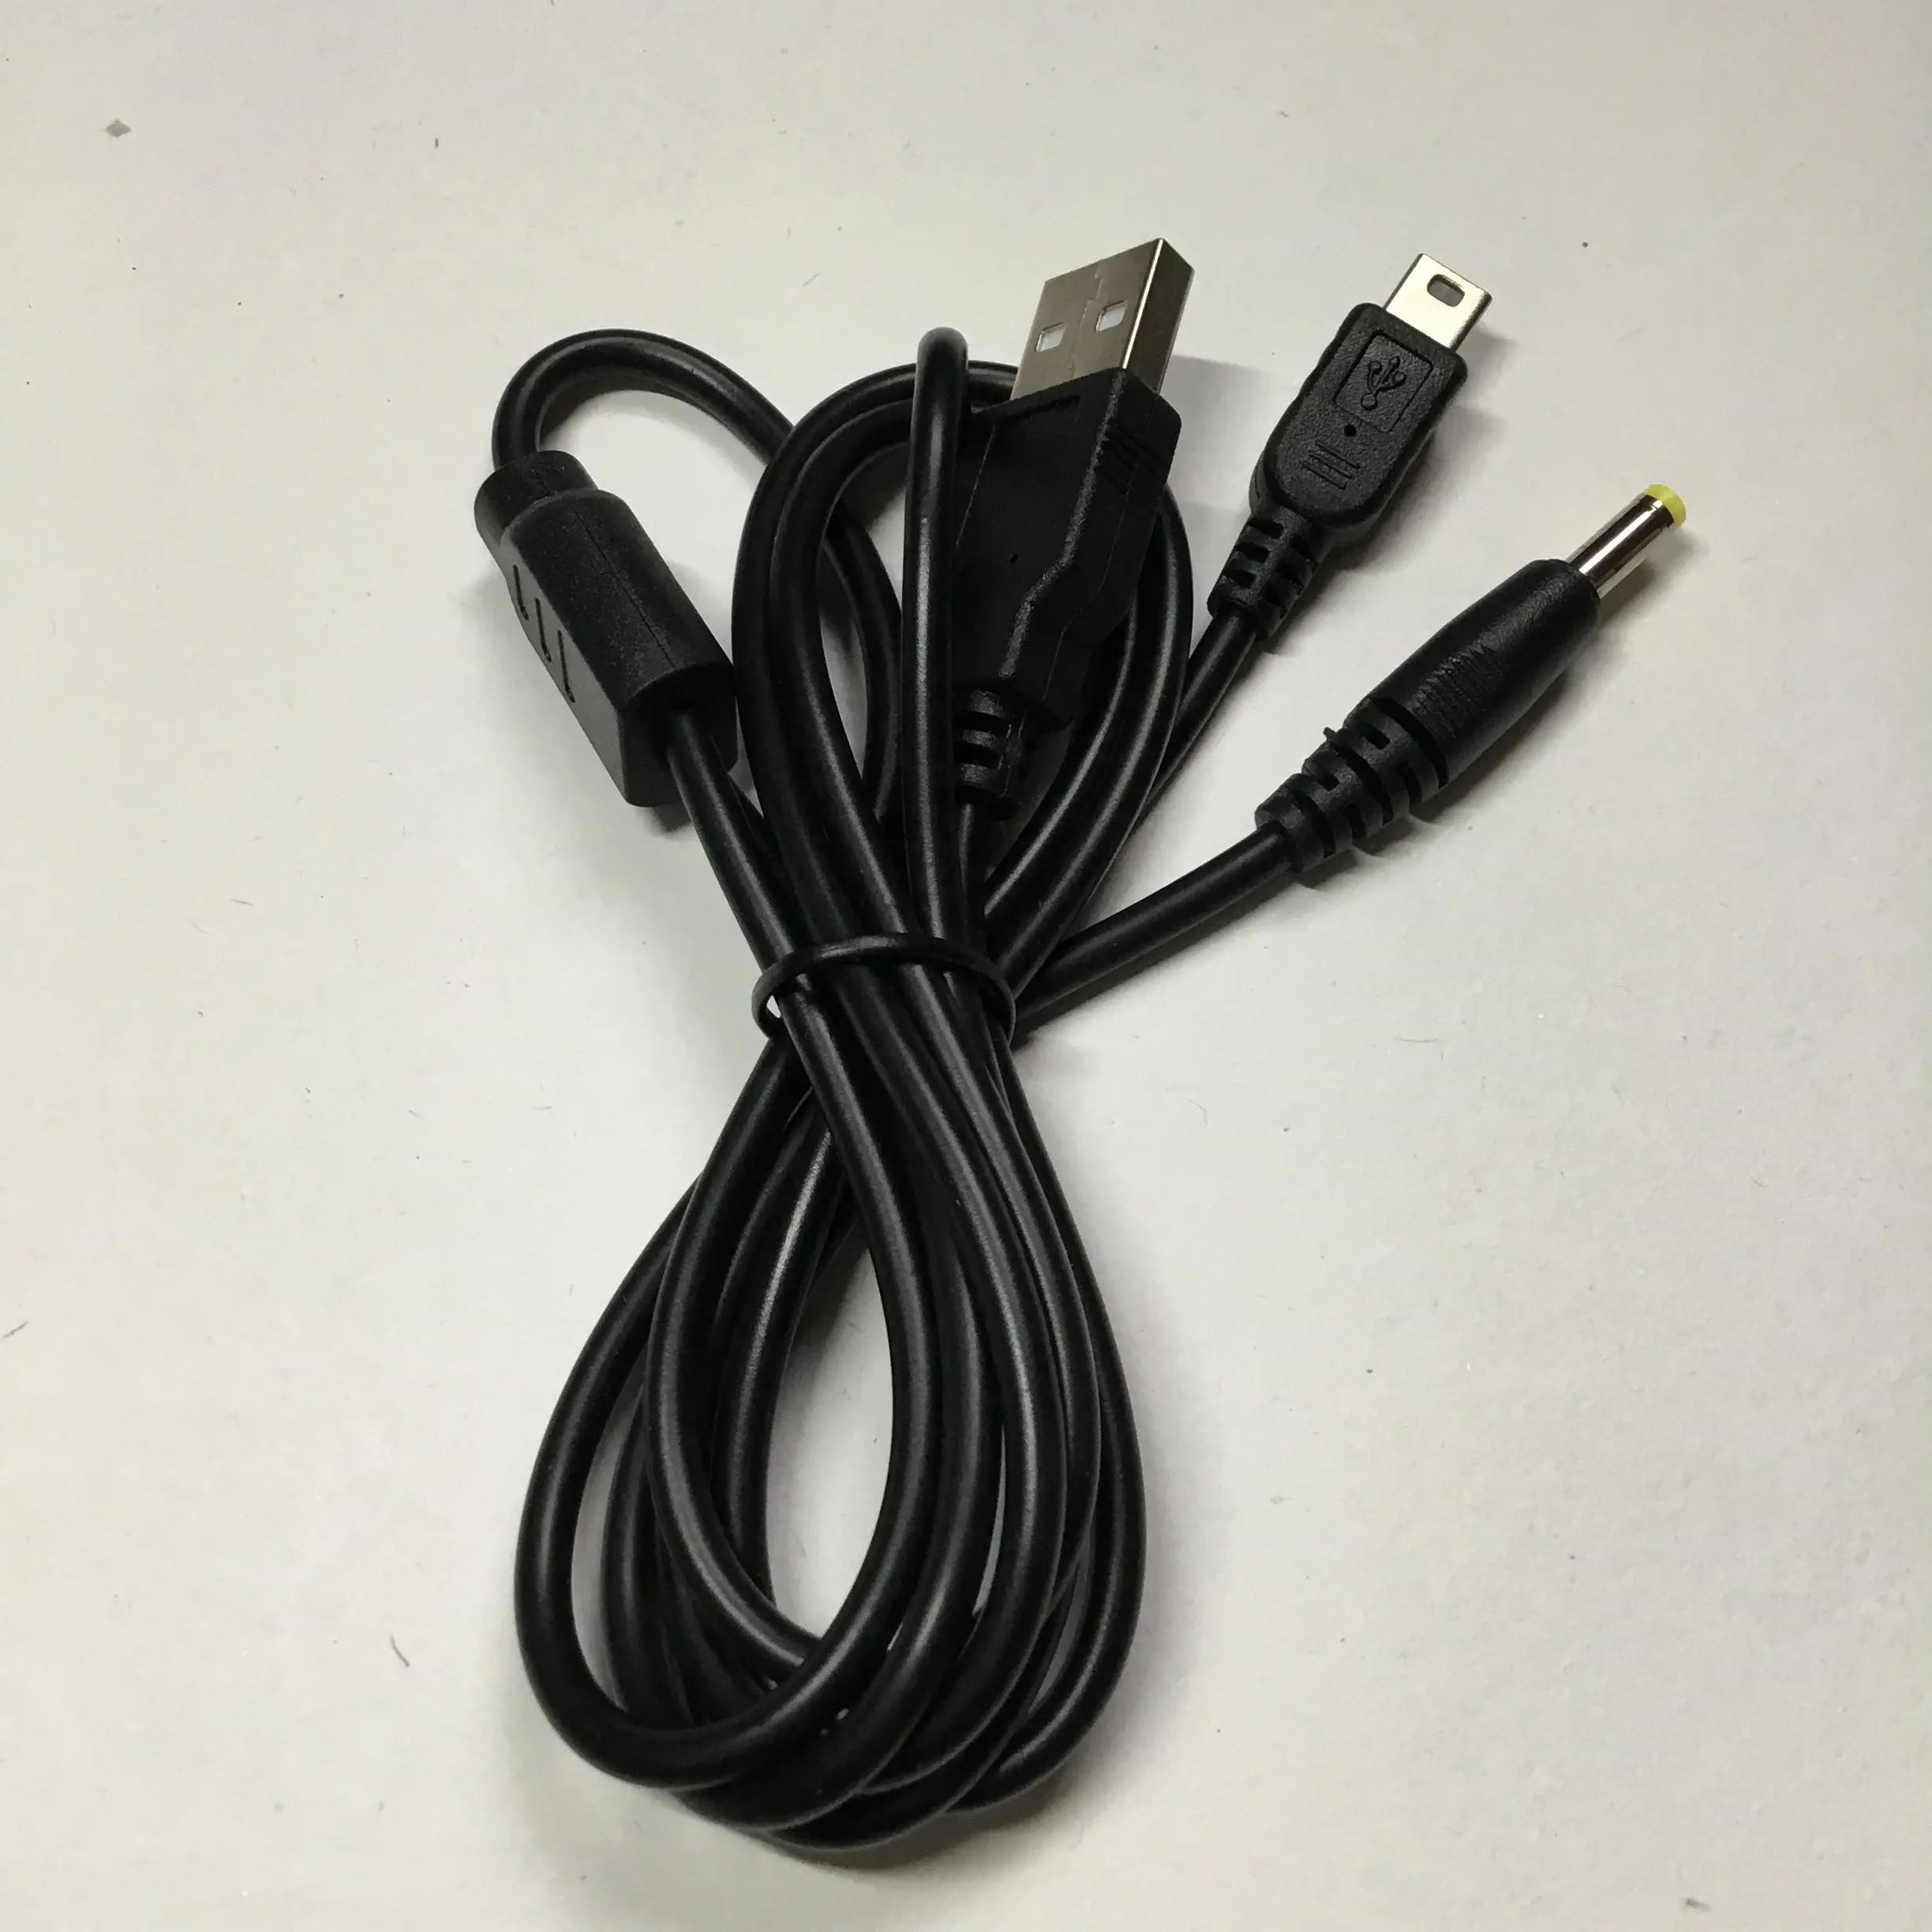 2 in 1 für PSP USB Cable Charger Charging Cable für PSP 1000 2000 3000 Data Transfer Cable Lead Cord 1.2m